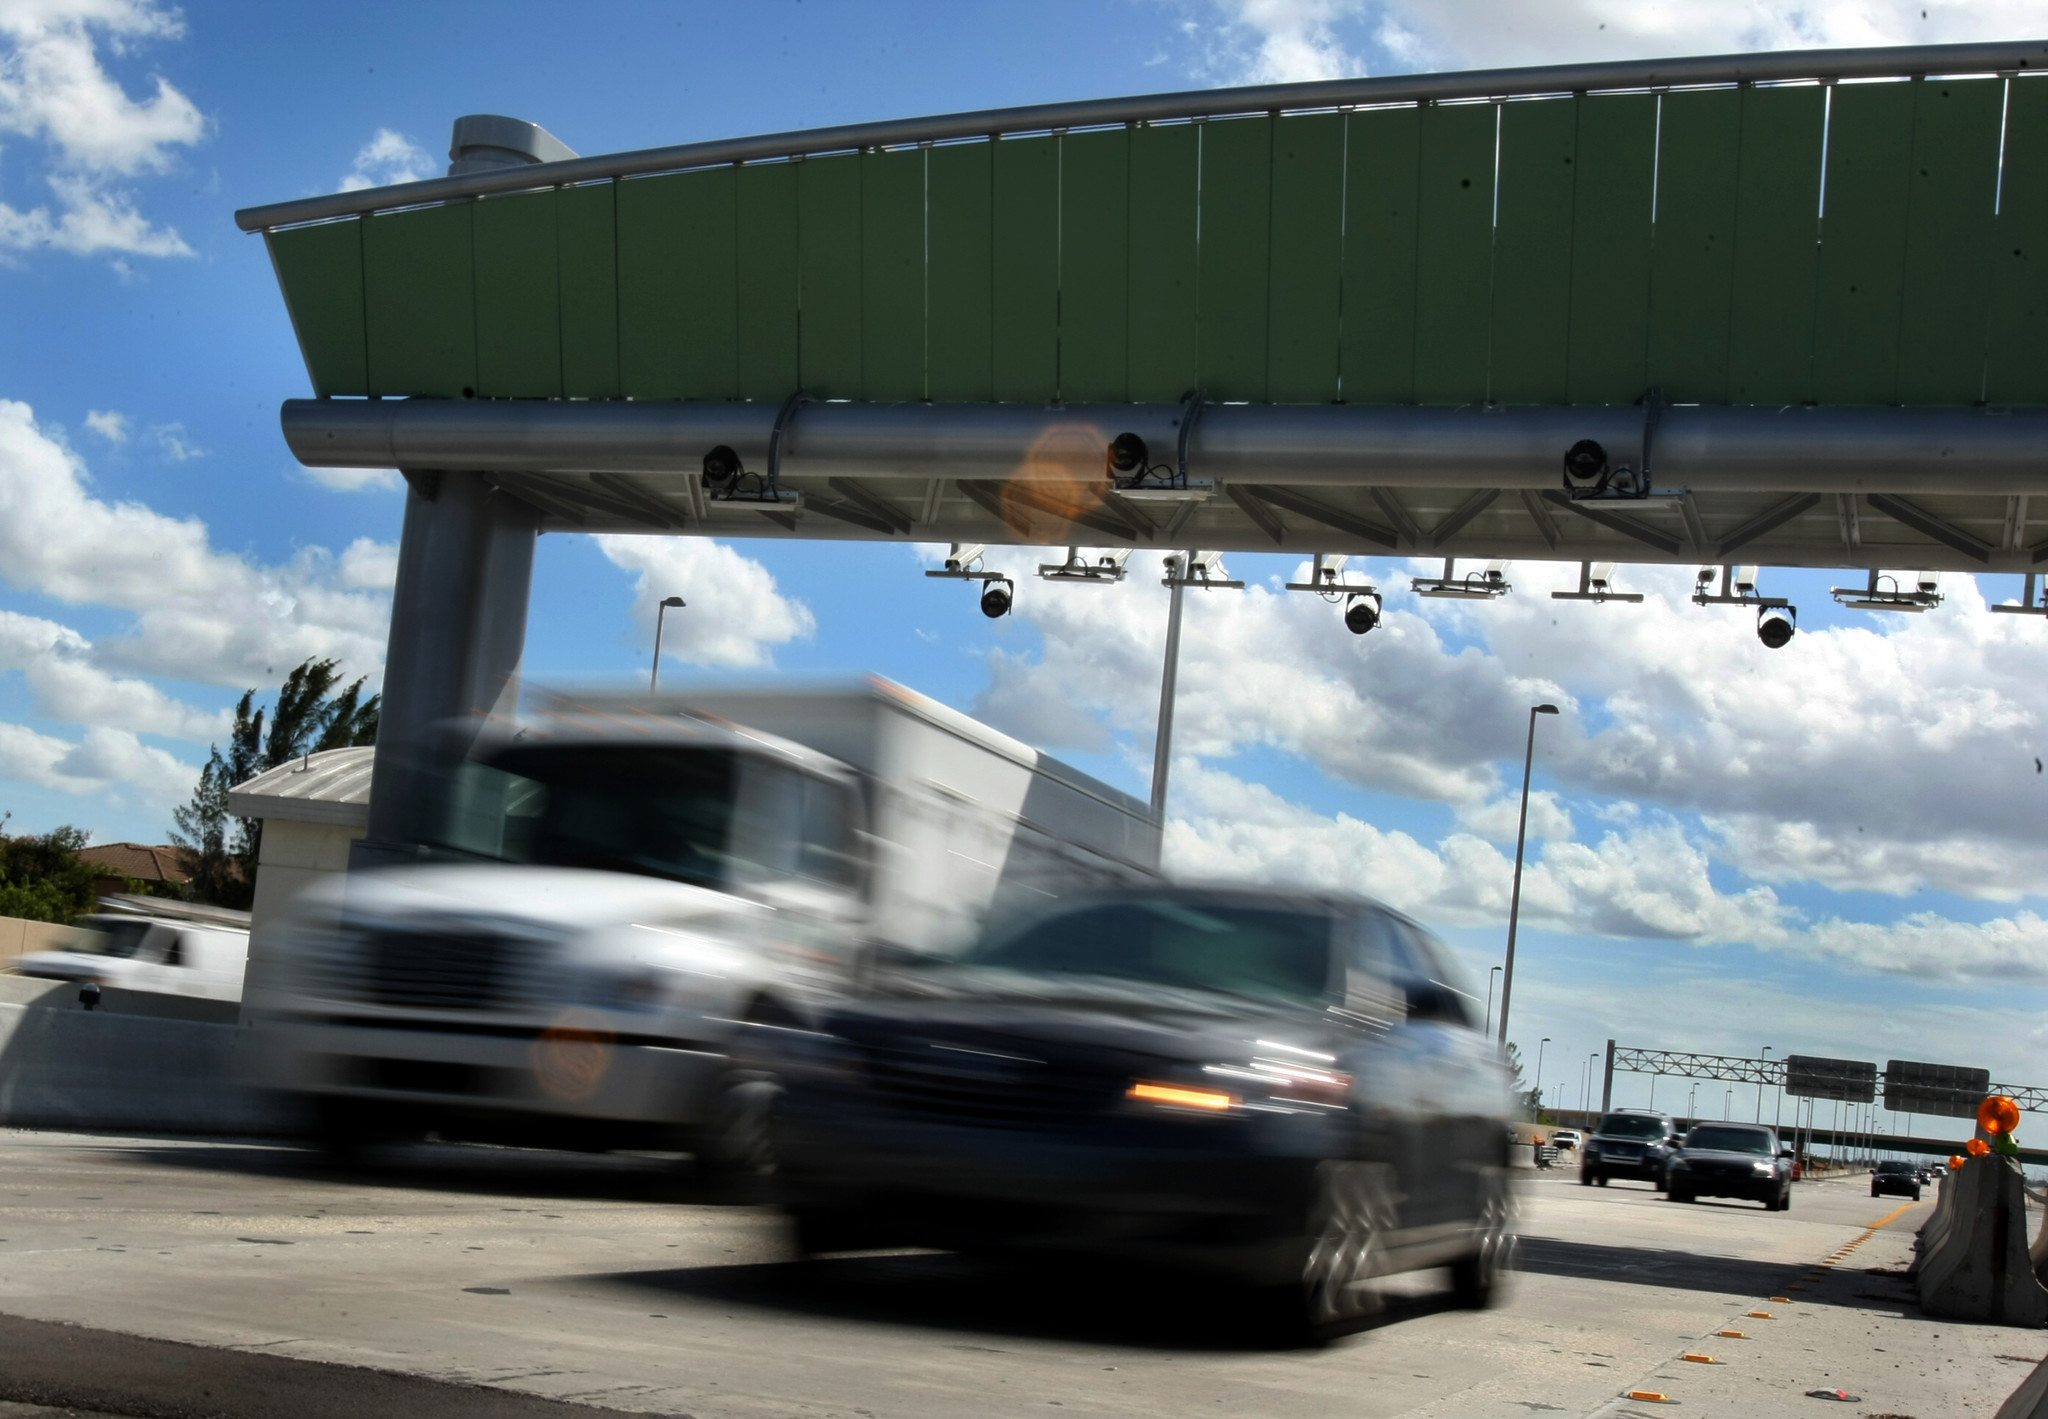 tolls-on-florida-s-turnpike-state-roads-go-up-on-july-1-sun-sentinel